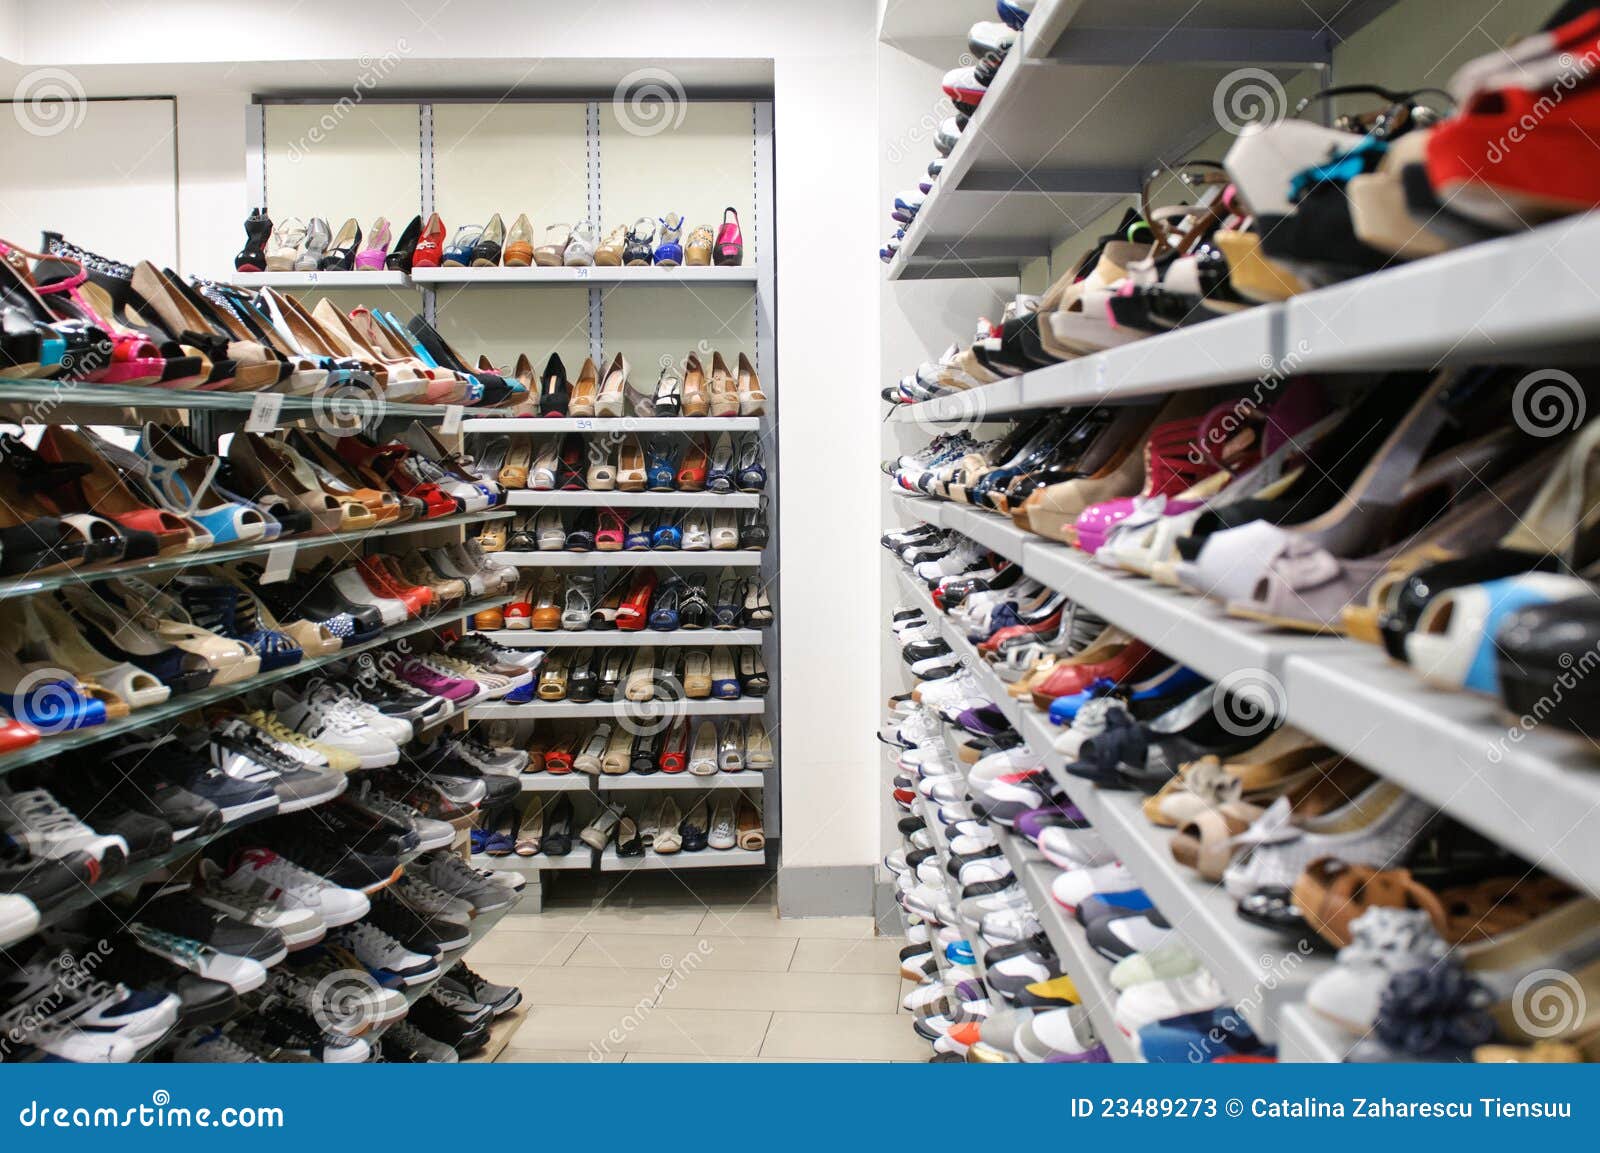 Male And Female Shoes Editorial Stock Photo - Image: 23489273